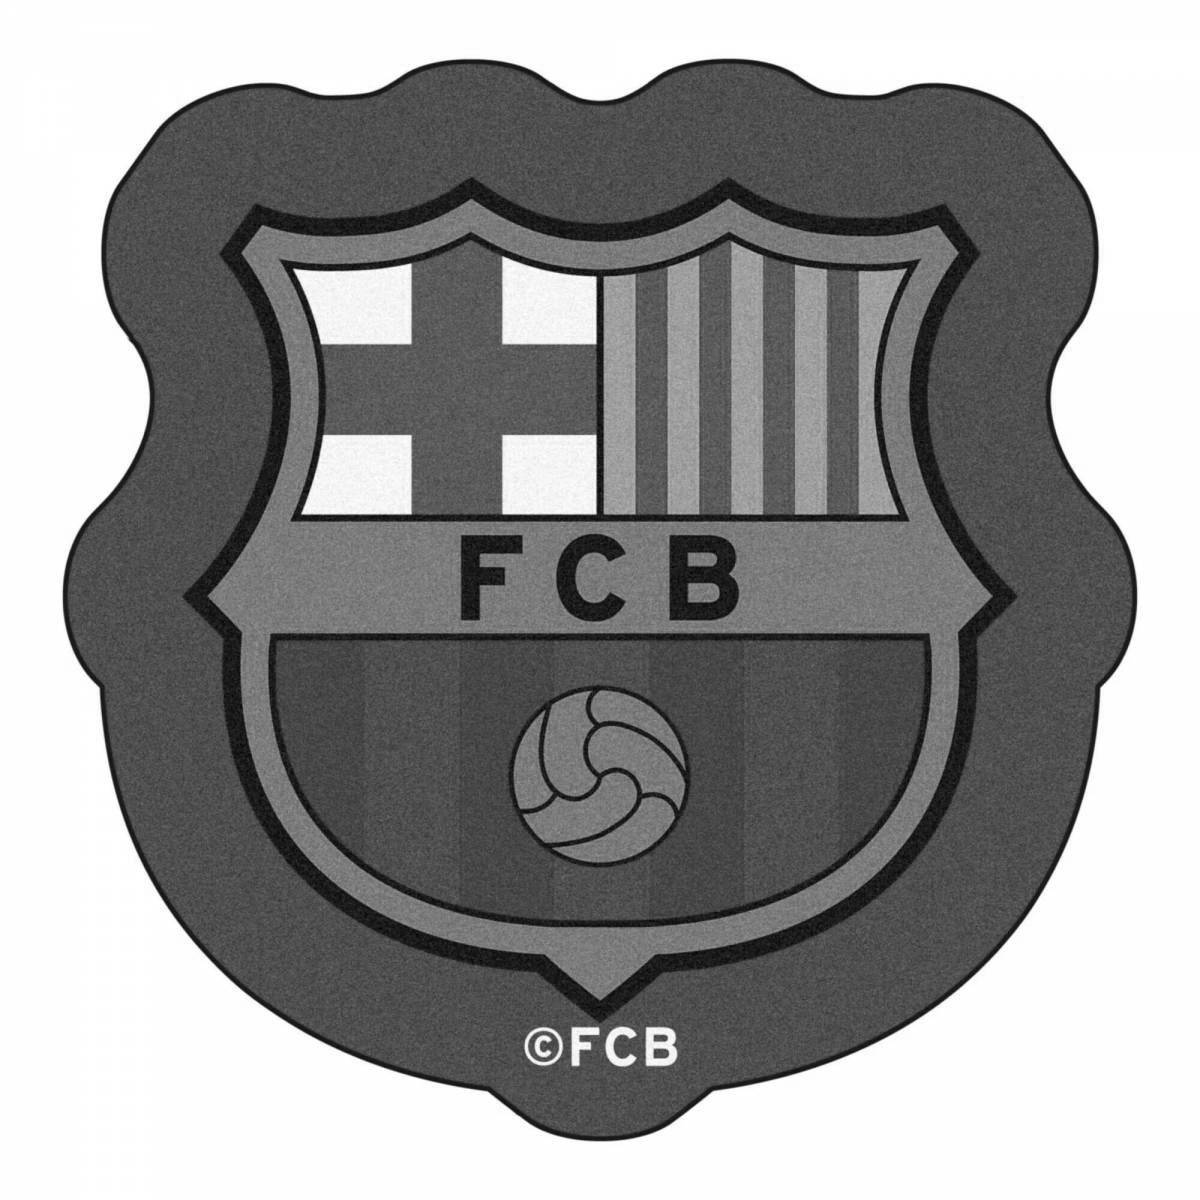 Great coloring of the emblem of barcelona